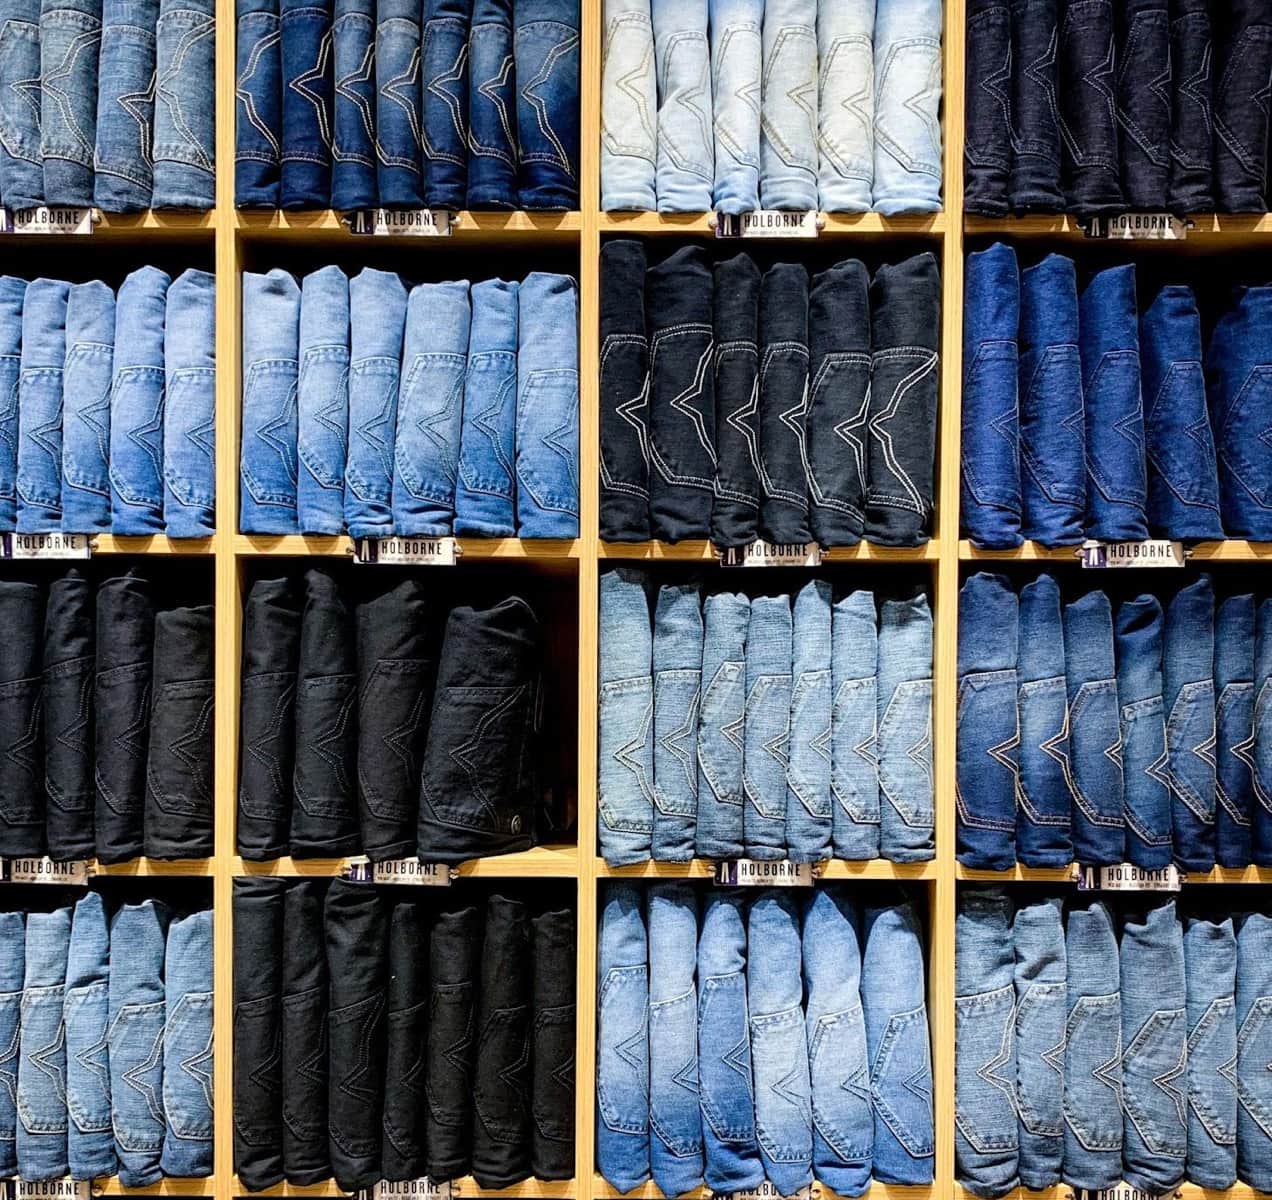 shelves full of jeans in different shades